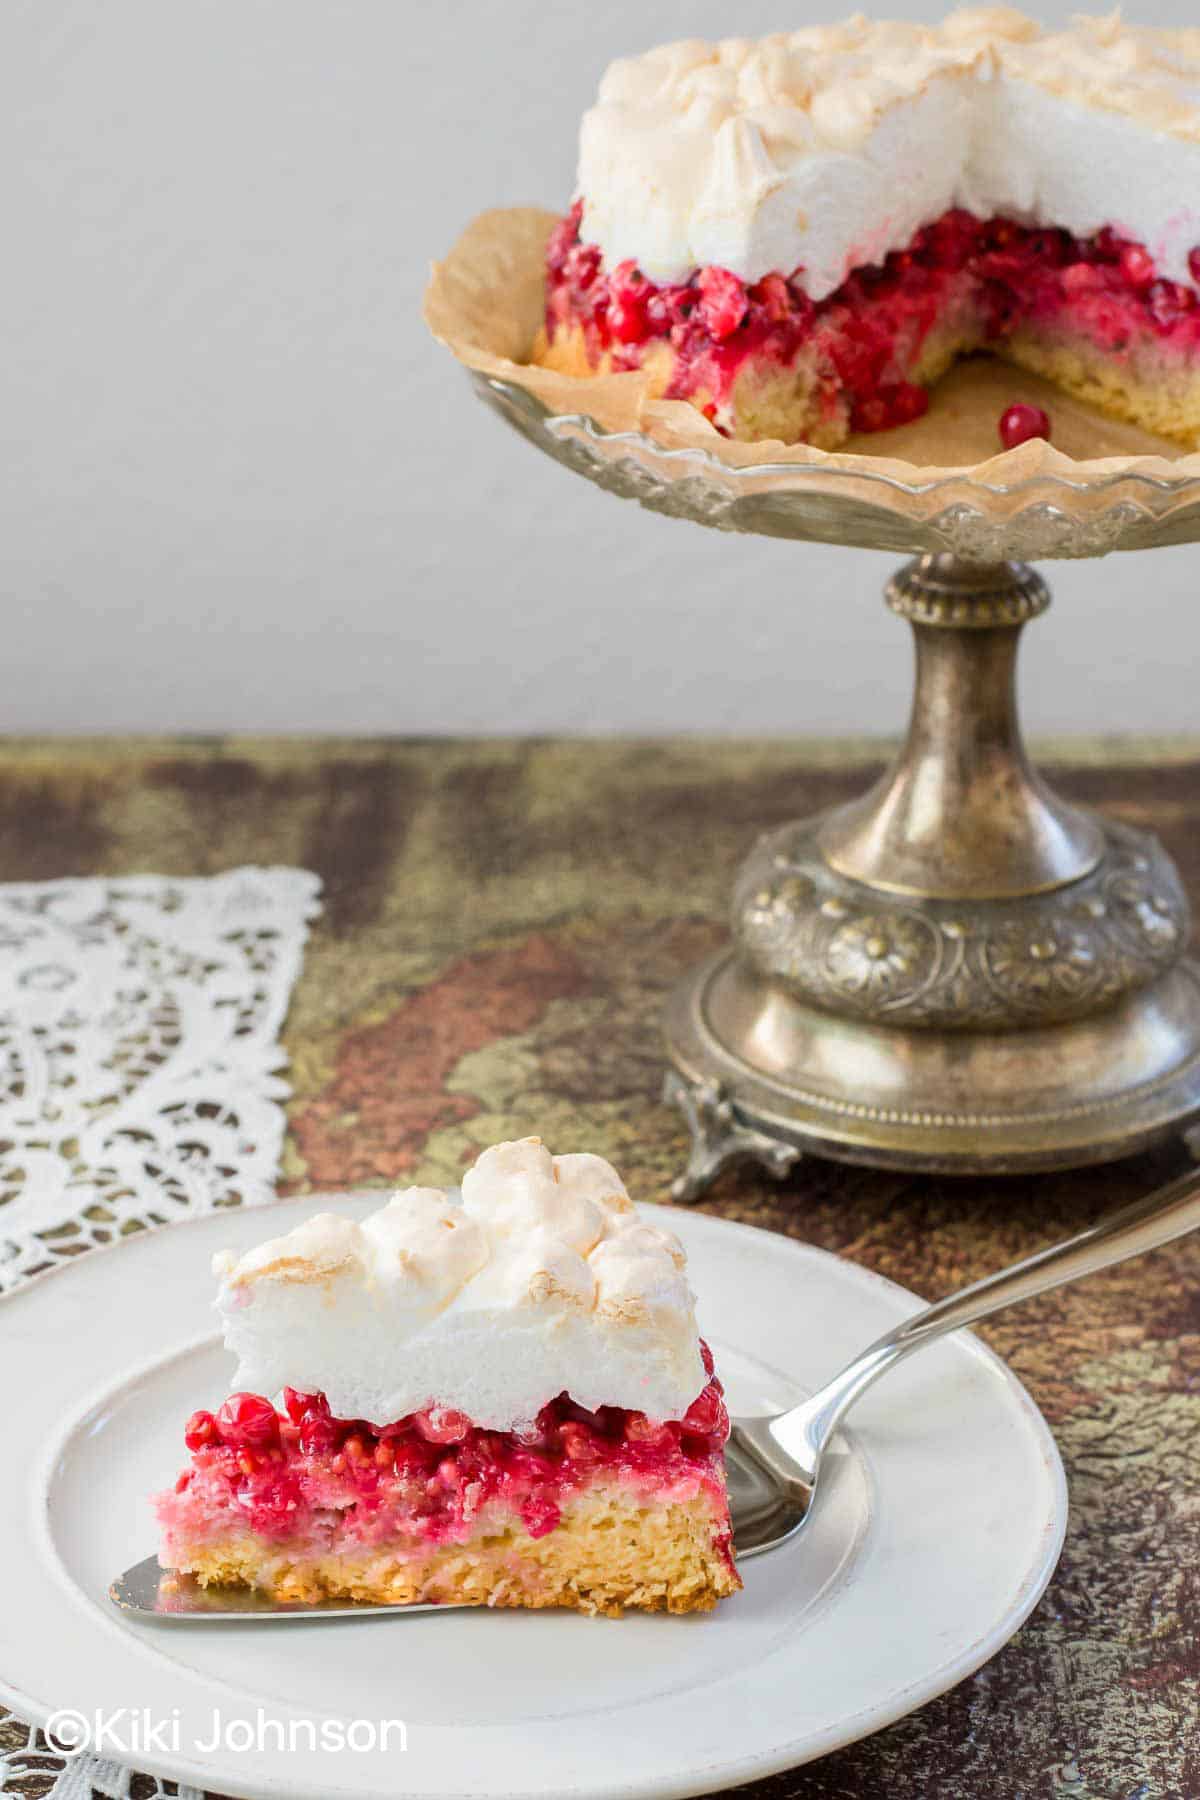 a slice of German redcurrant cake with fresh red currants and meringue topping 